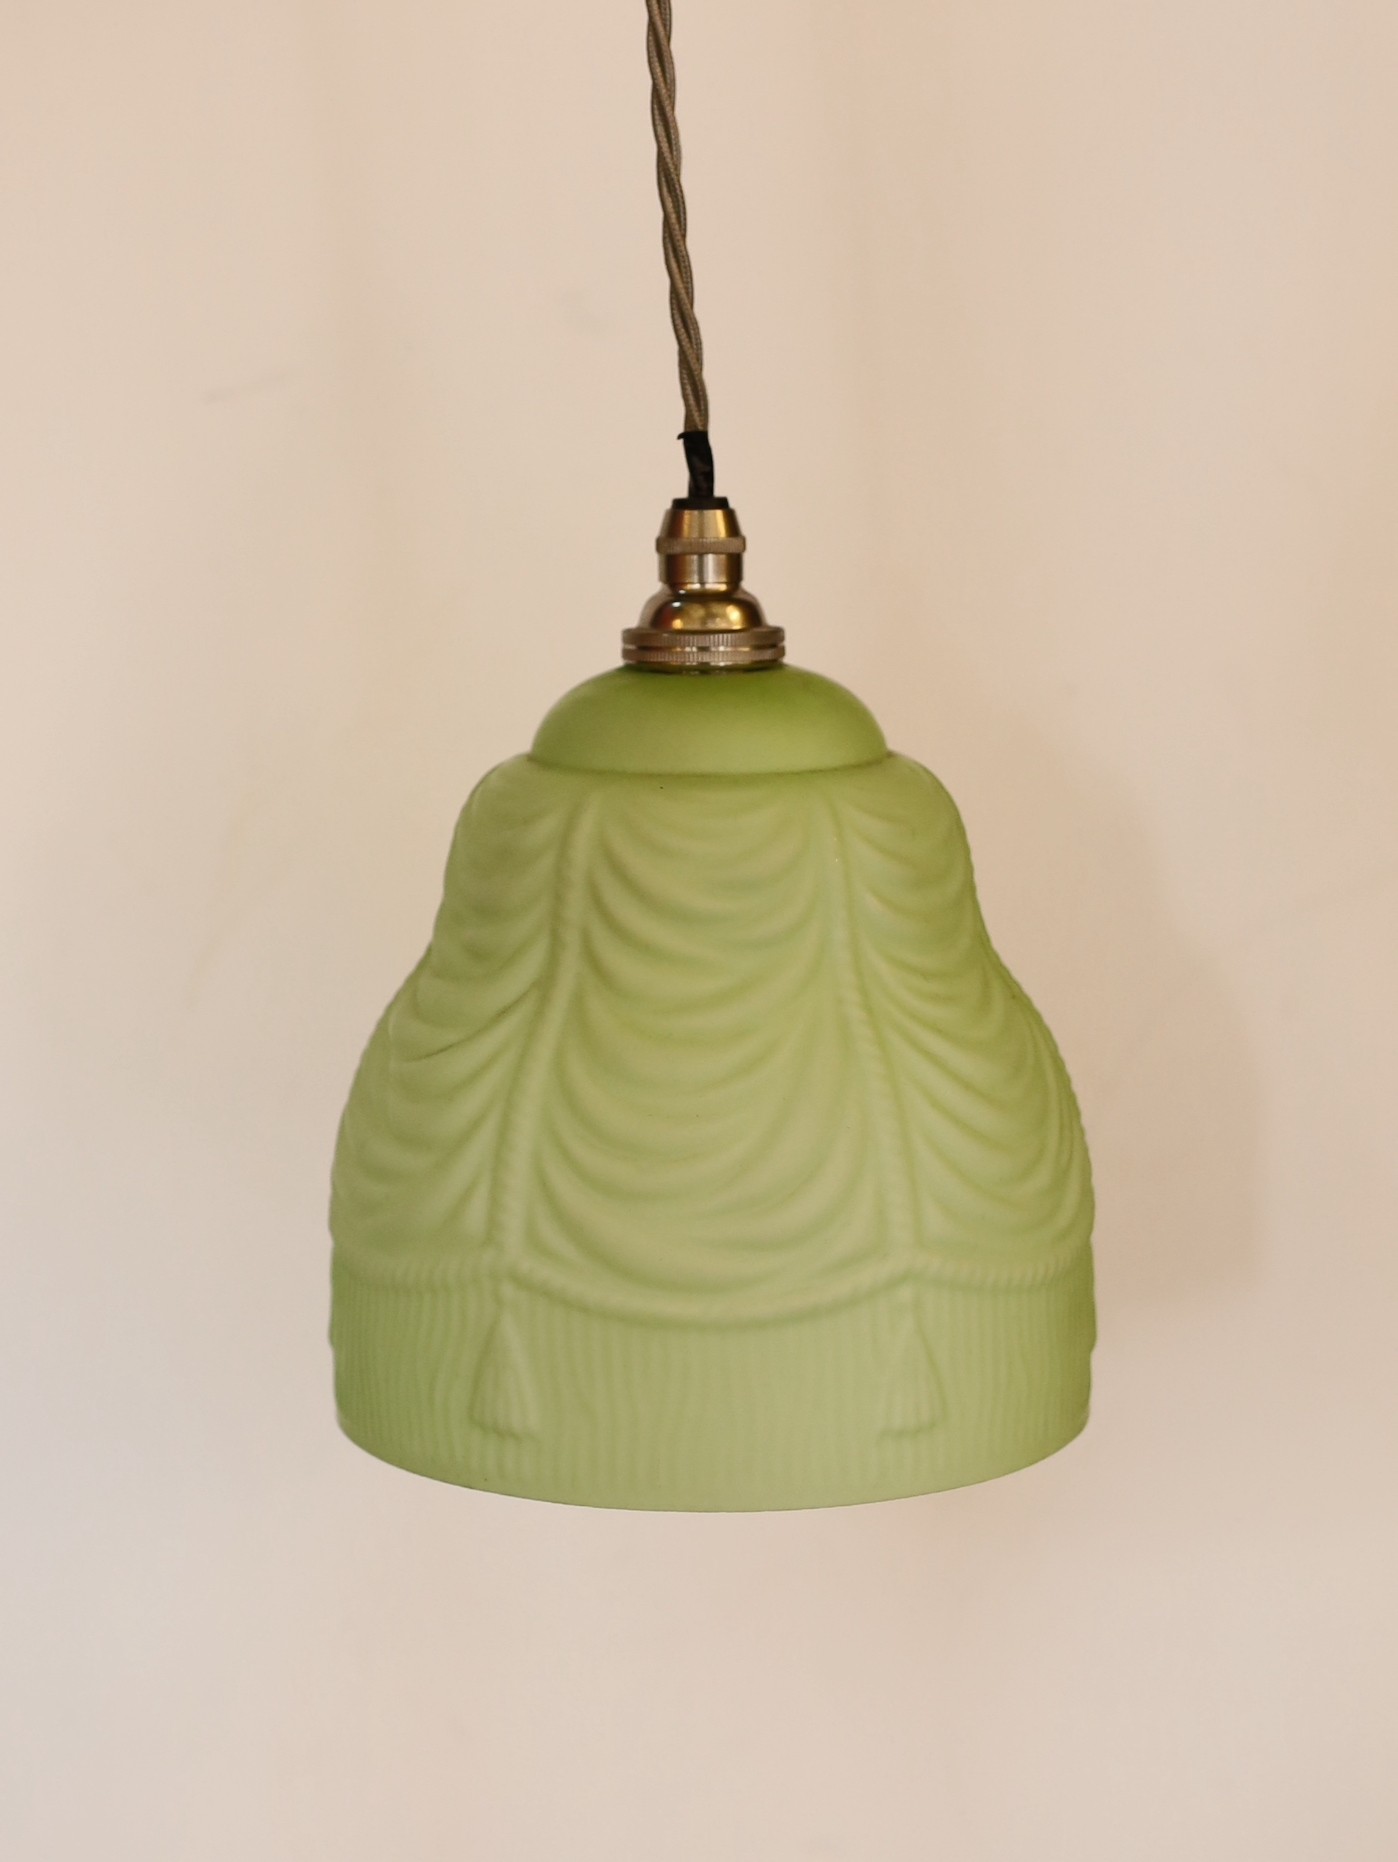 A pair of 1930s frosted green paint glass lampshades with pendant fittings, height 19cm, width 15cm